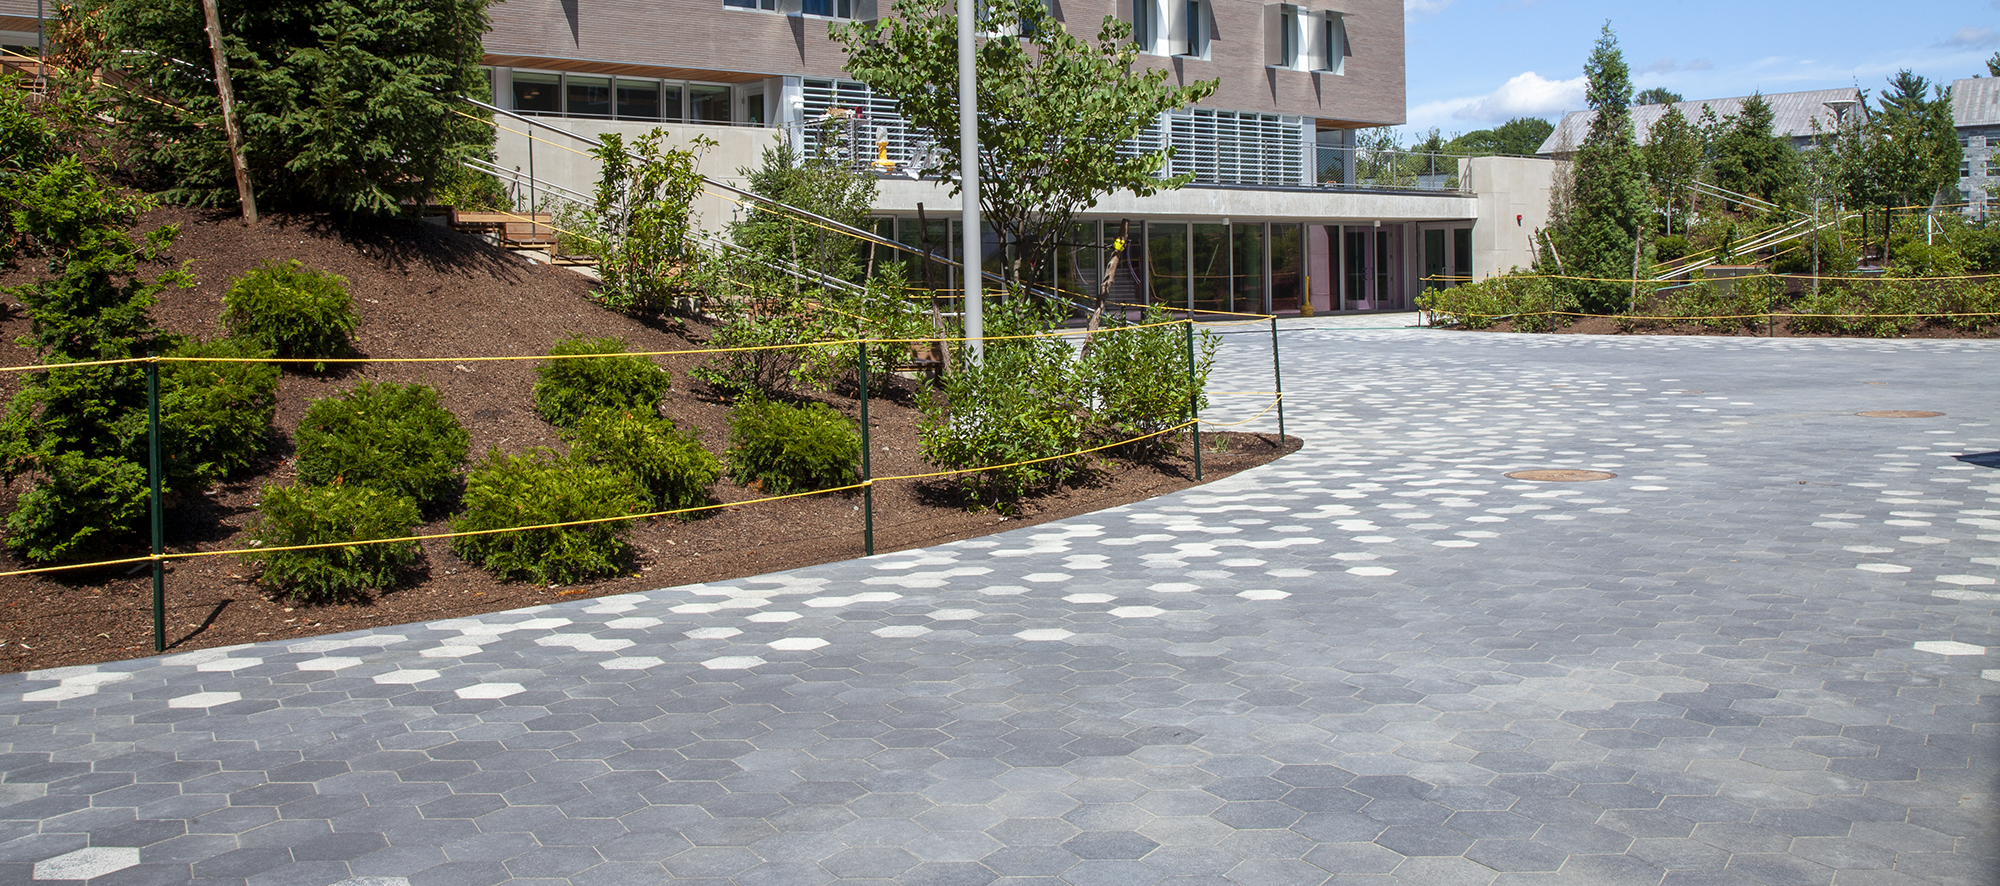 Two-toned hexagon shaped City Park Pavers in a pixelated pattern, surrounded by shrub bushes adding touches of natural color.